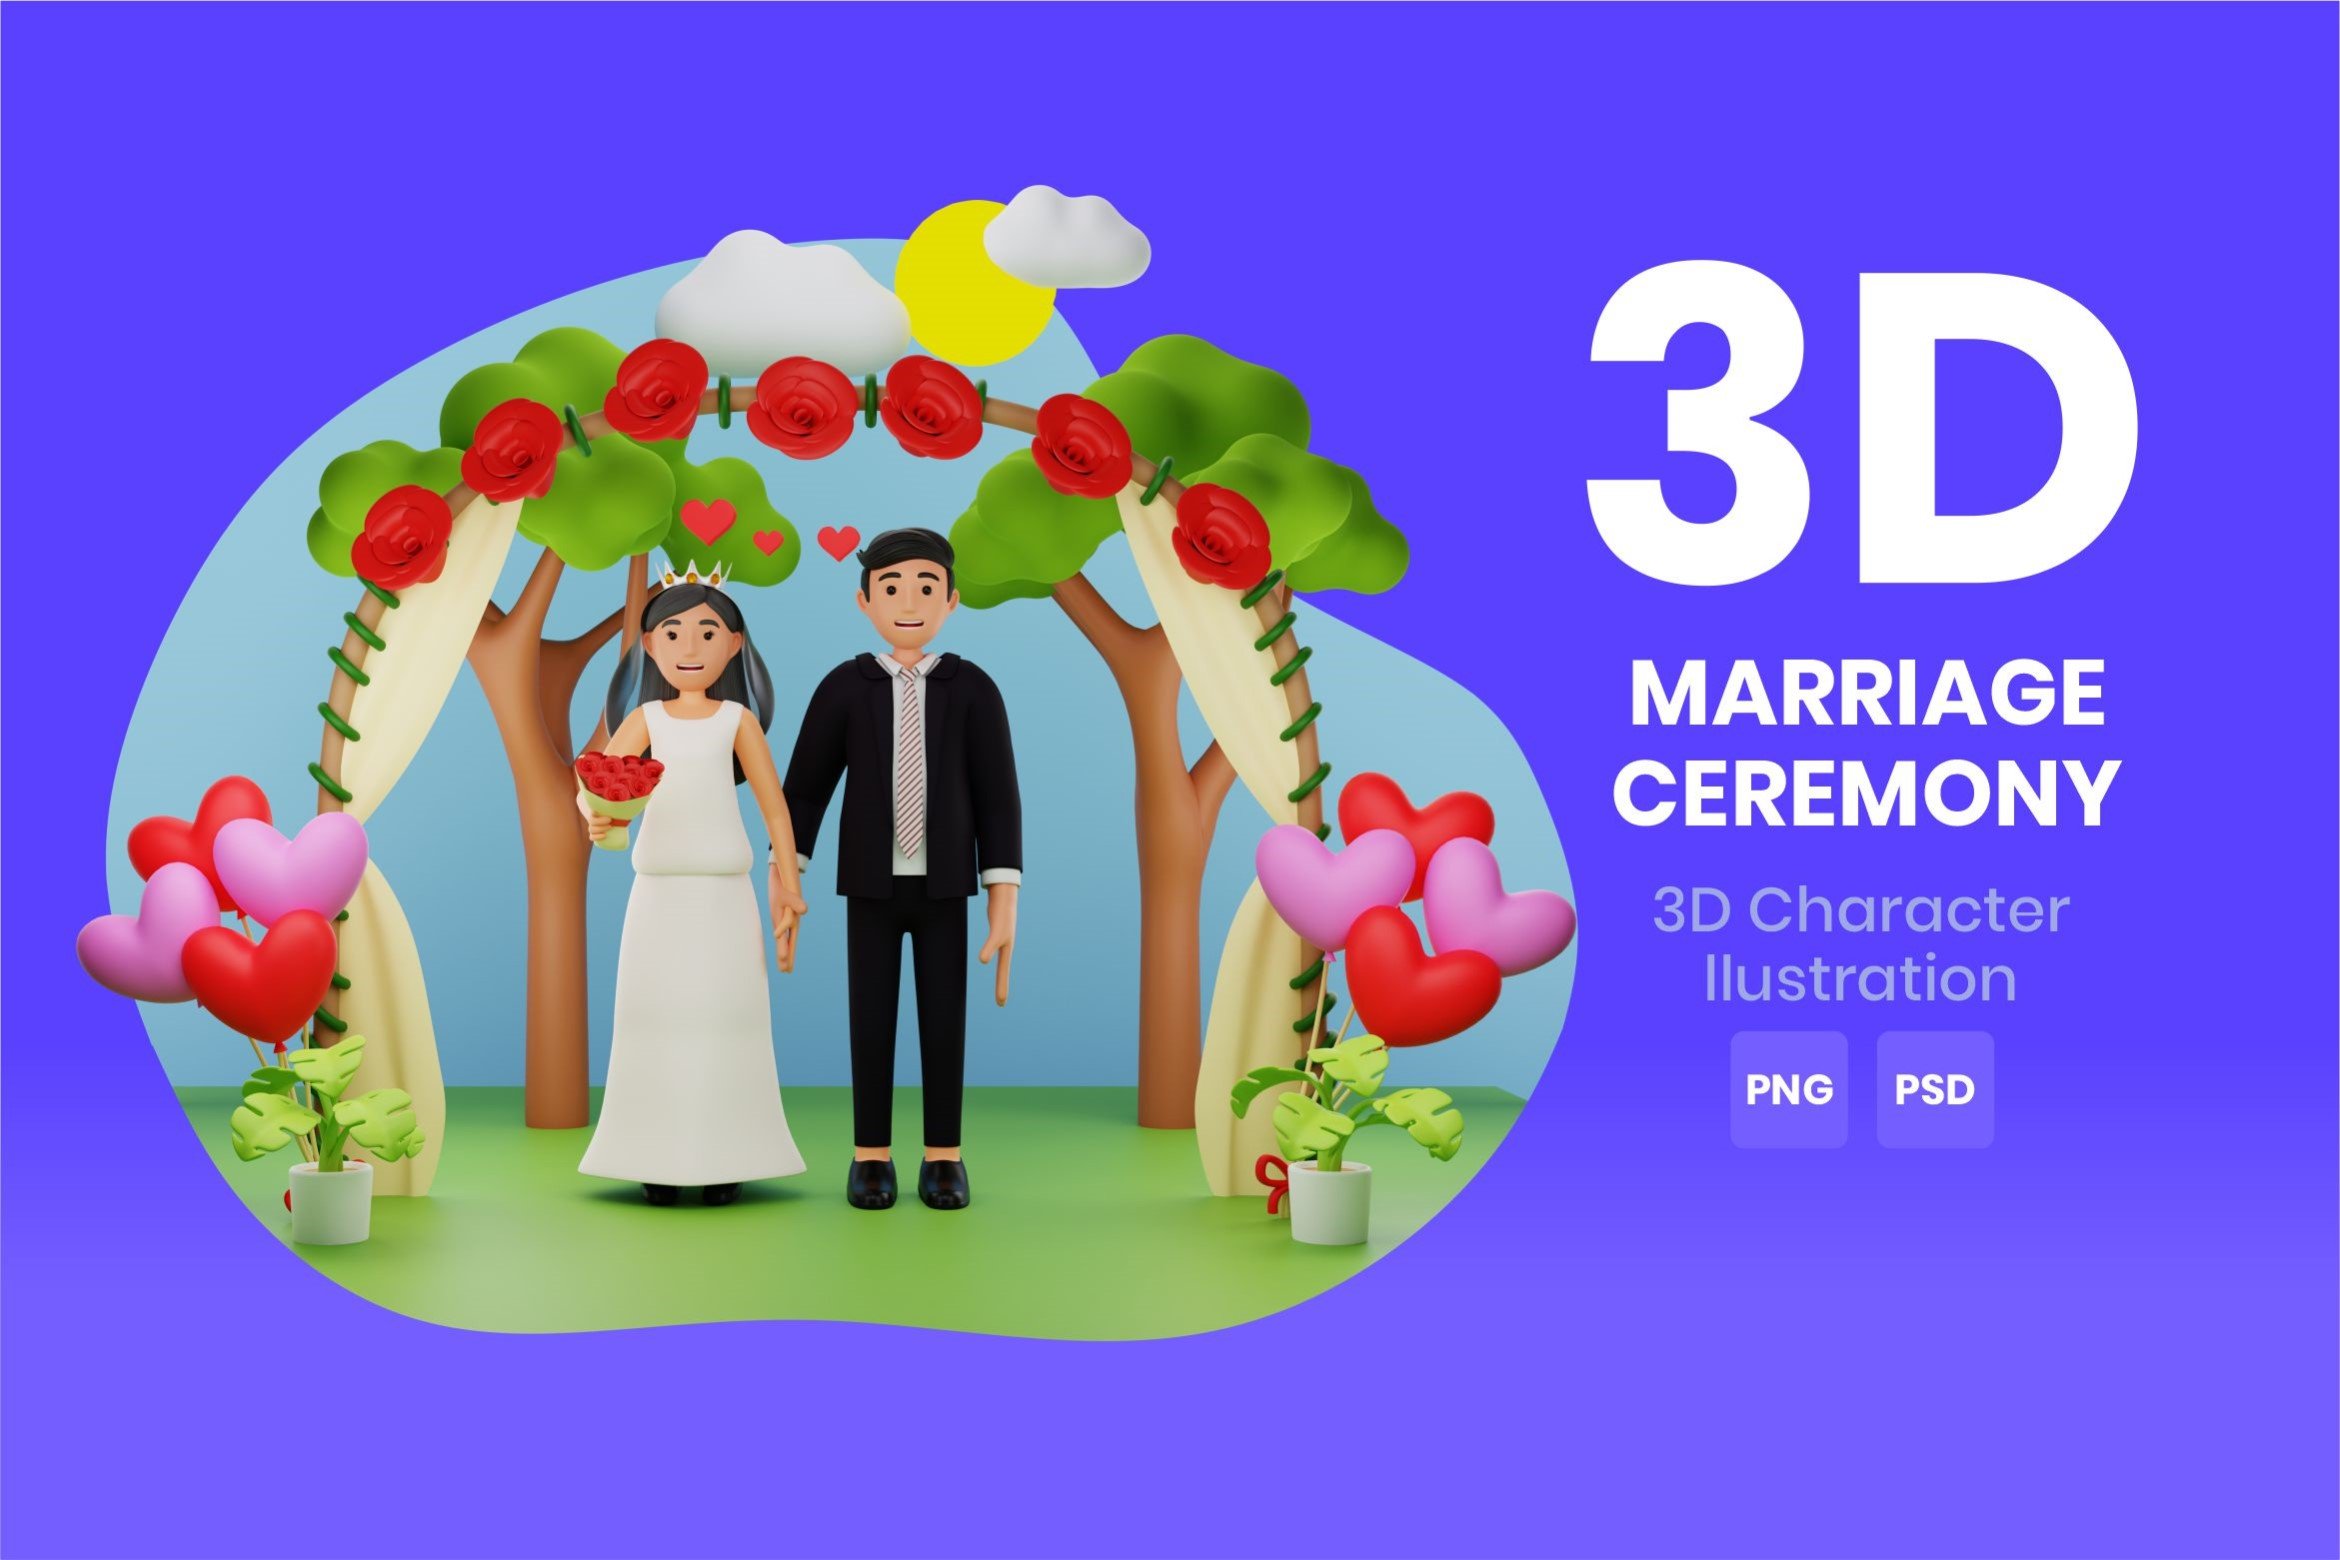 Marriage Ceremony 3D Character cover image.